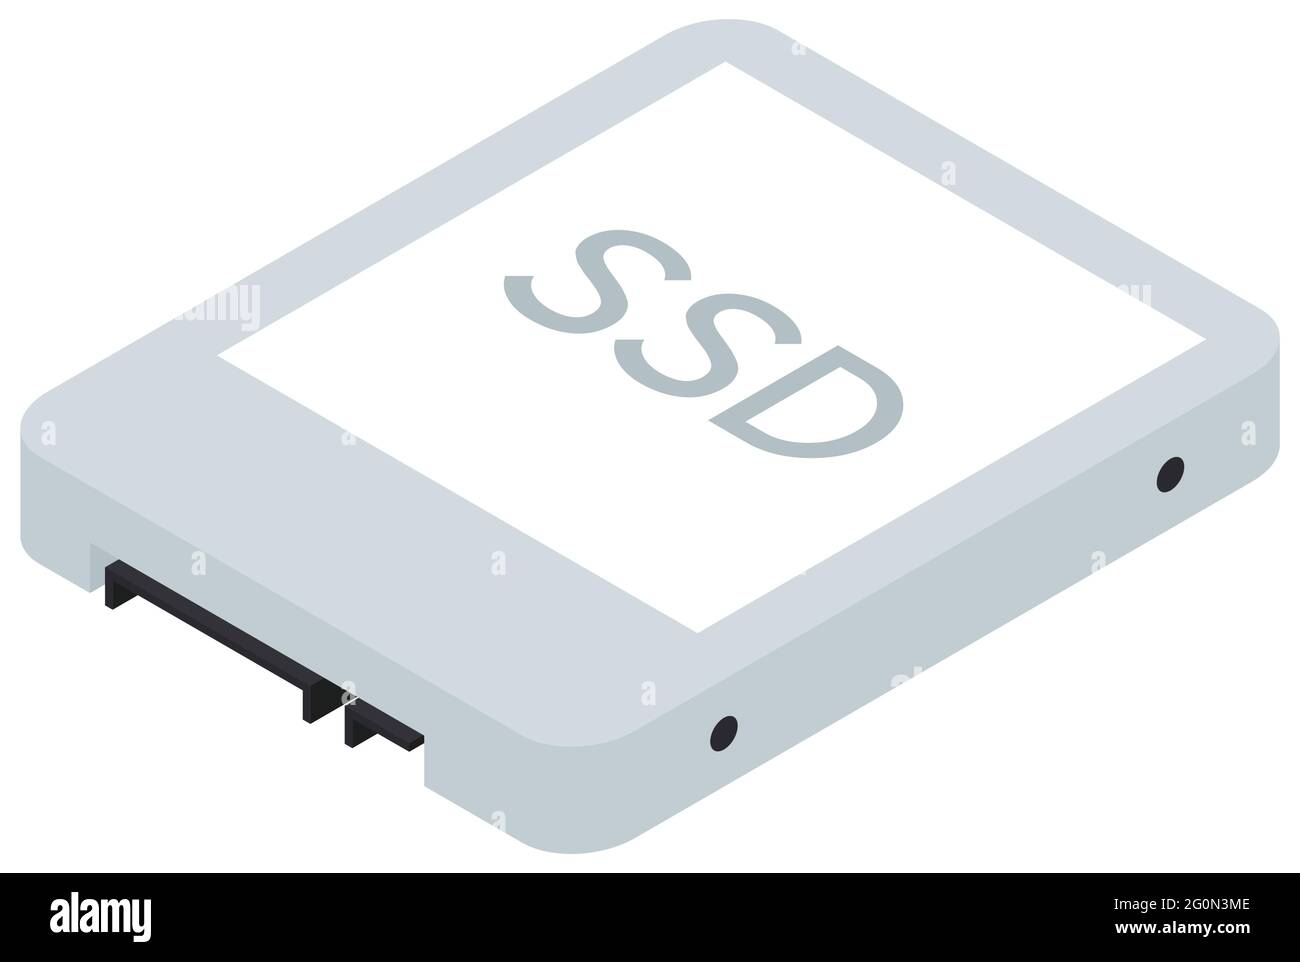 SSD isometric icon, Solid State Drive storage device. Information and data save equipment. Vector illustration isolated on white background Stock Vector